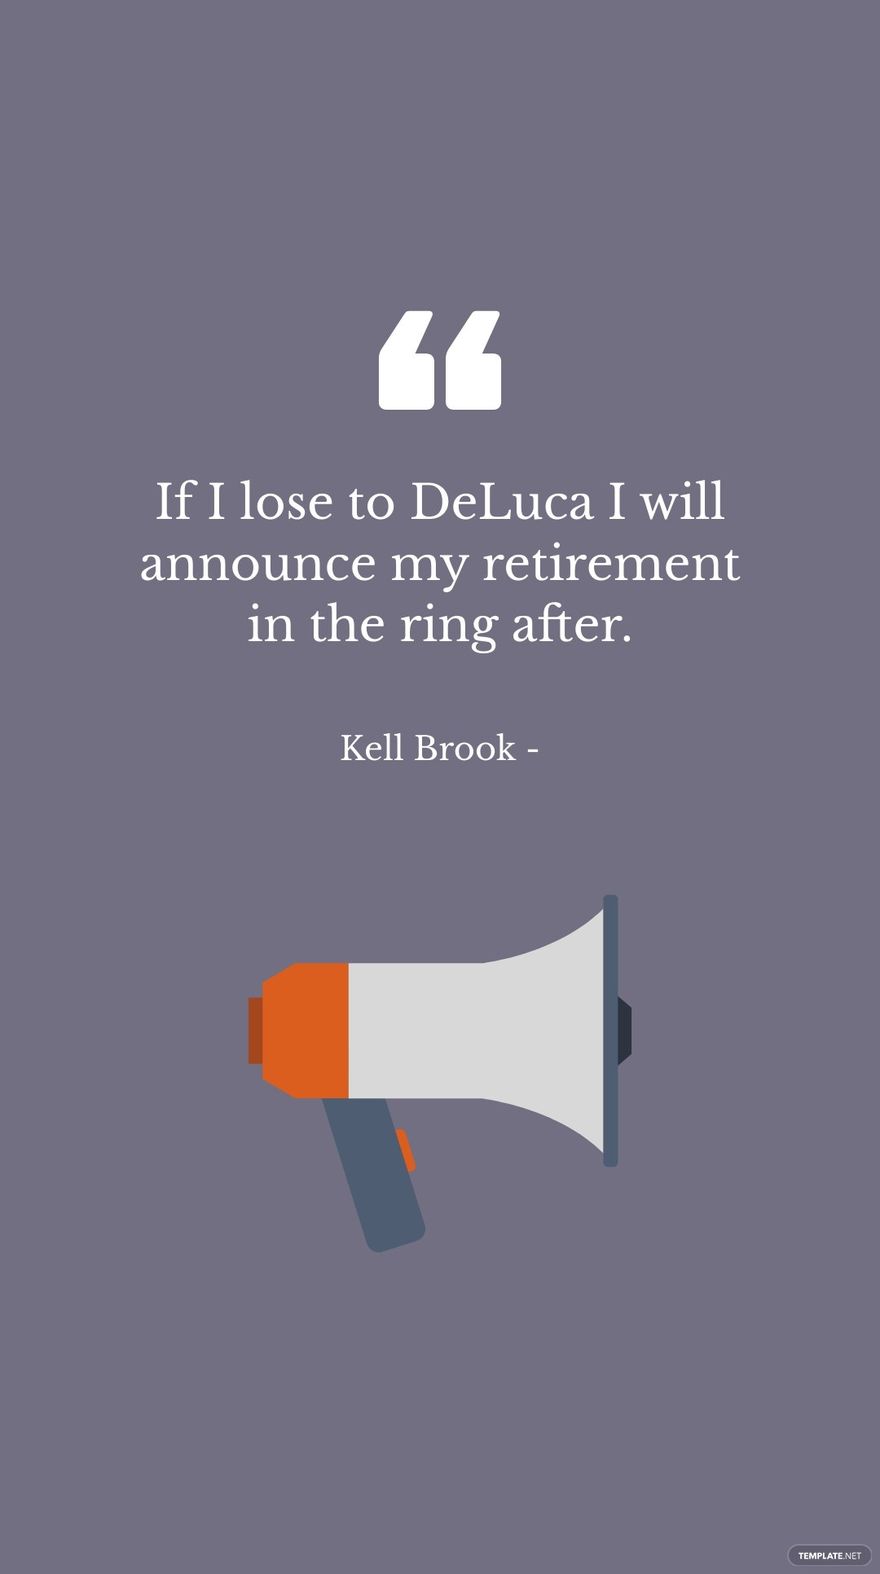 Kell Brook - If I lose to DeLuca I will announce my retirement in the ring after. in JPG